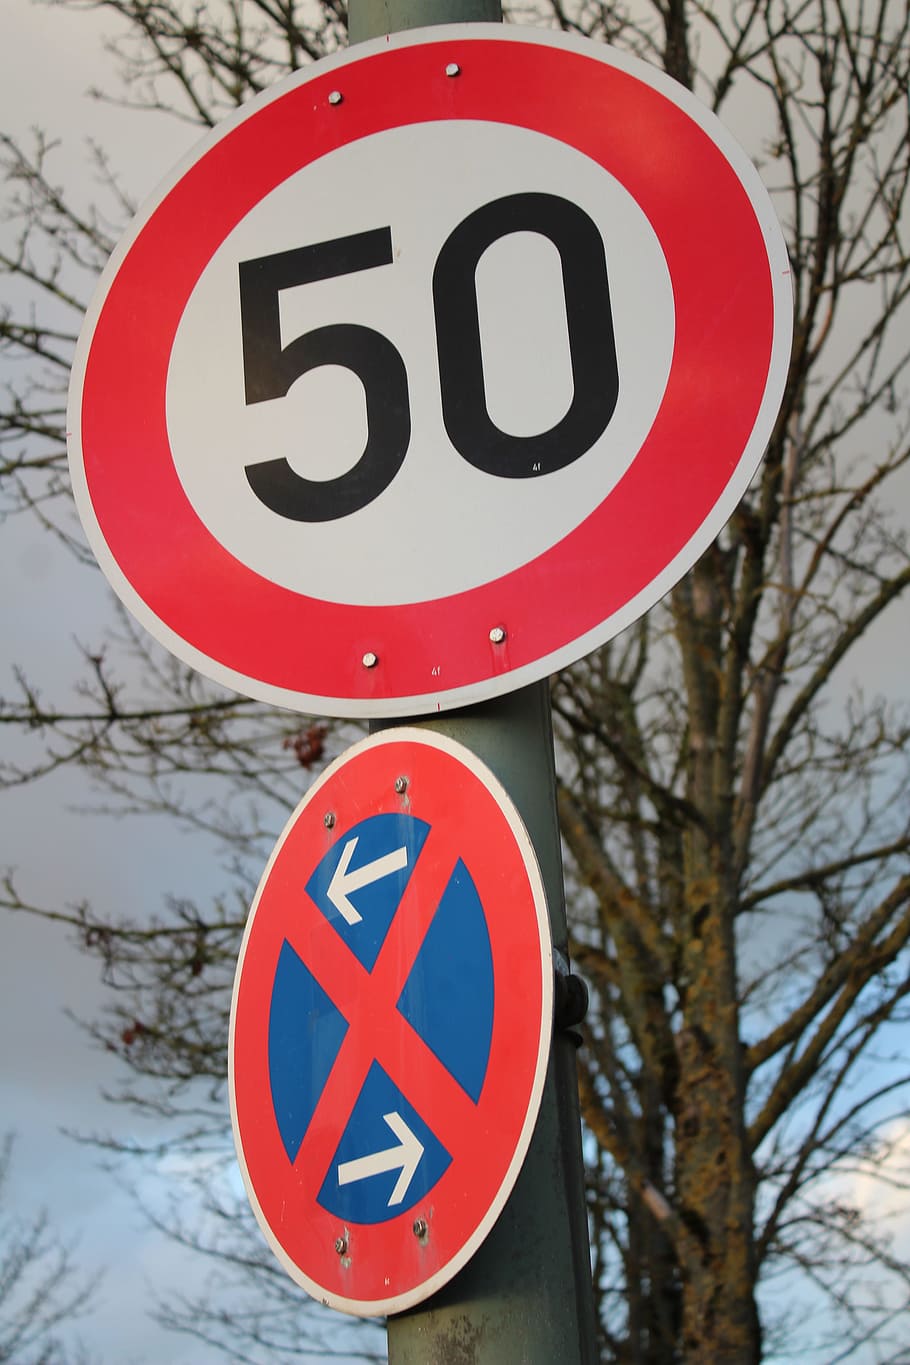 traffic sign, shield, red, traffic, road sign, street sign, 50 kmh, speed, speed limitation, speed limit